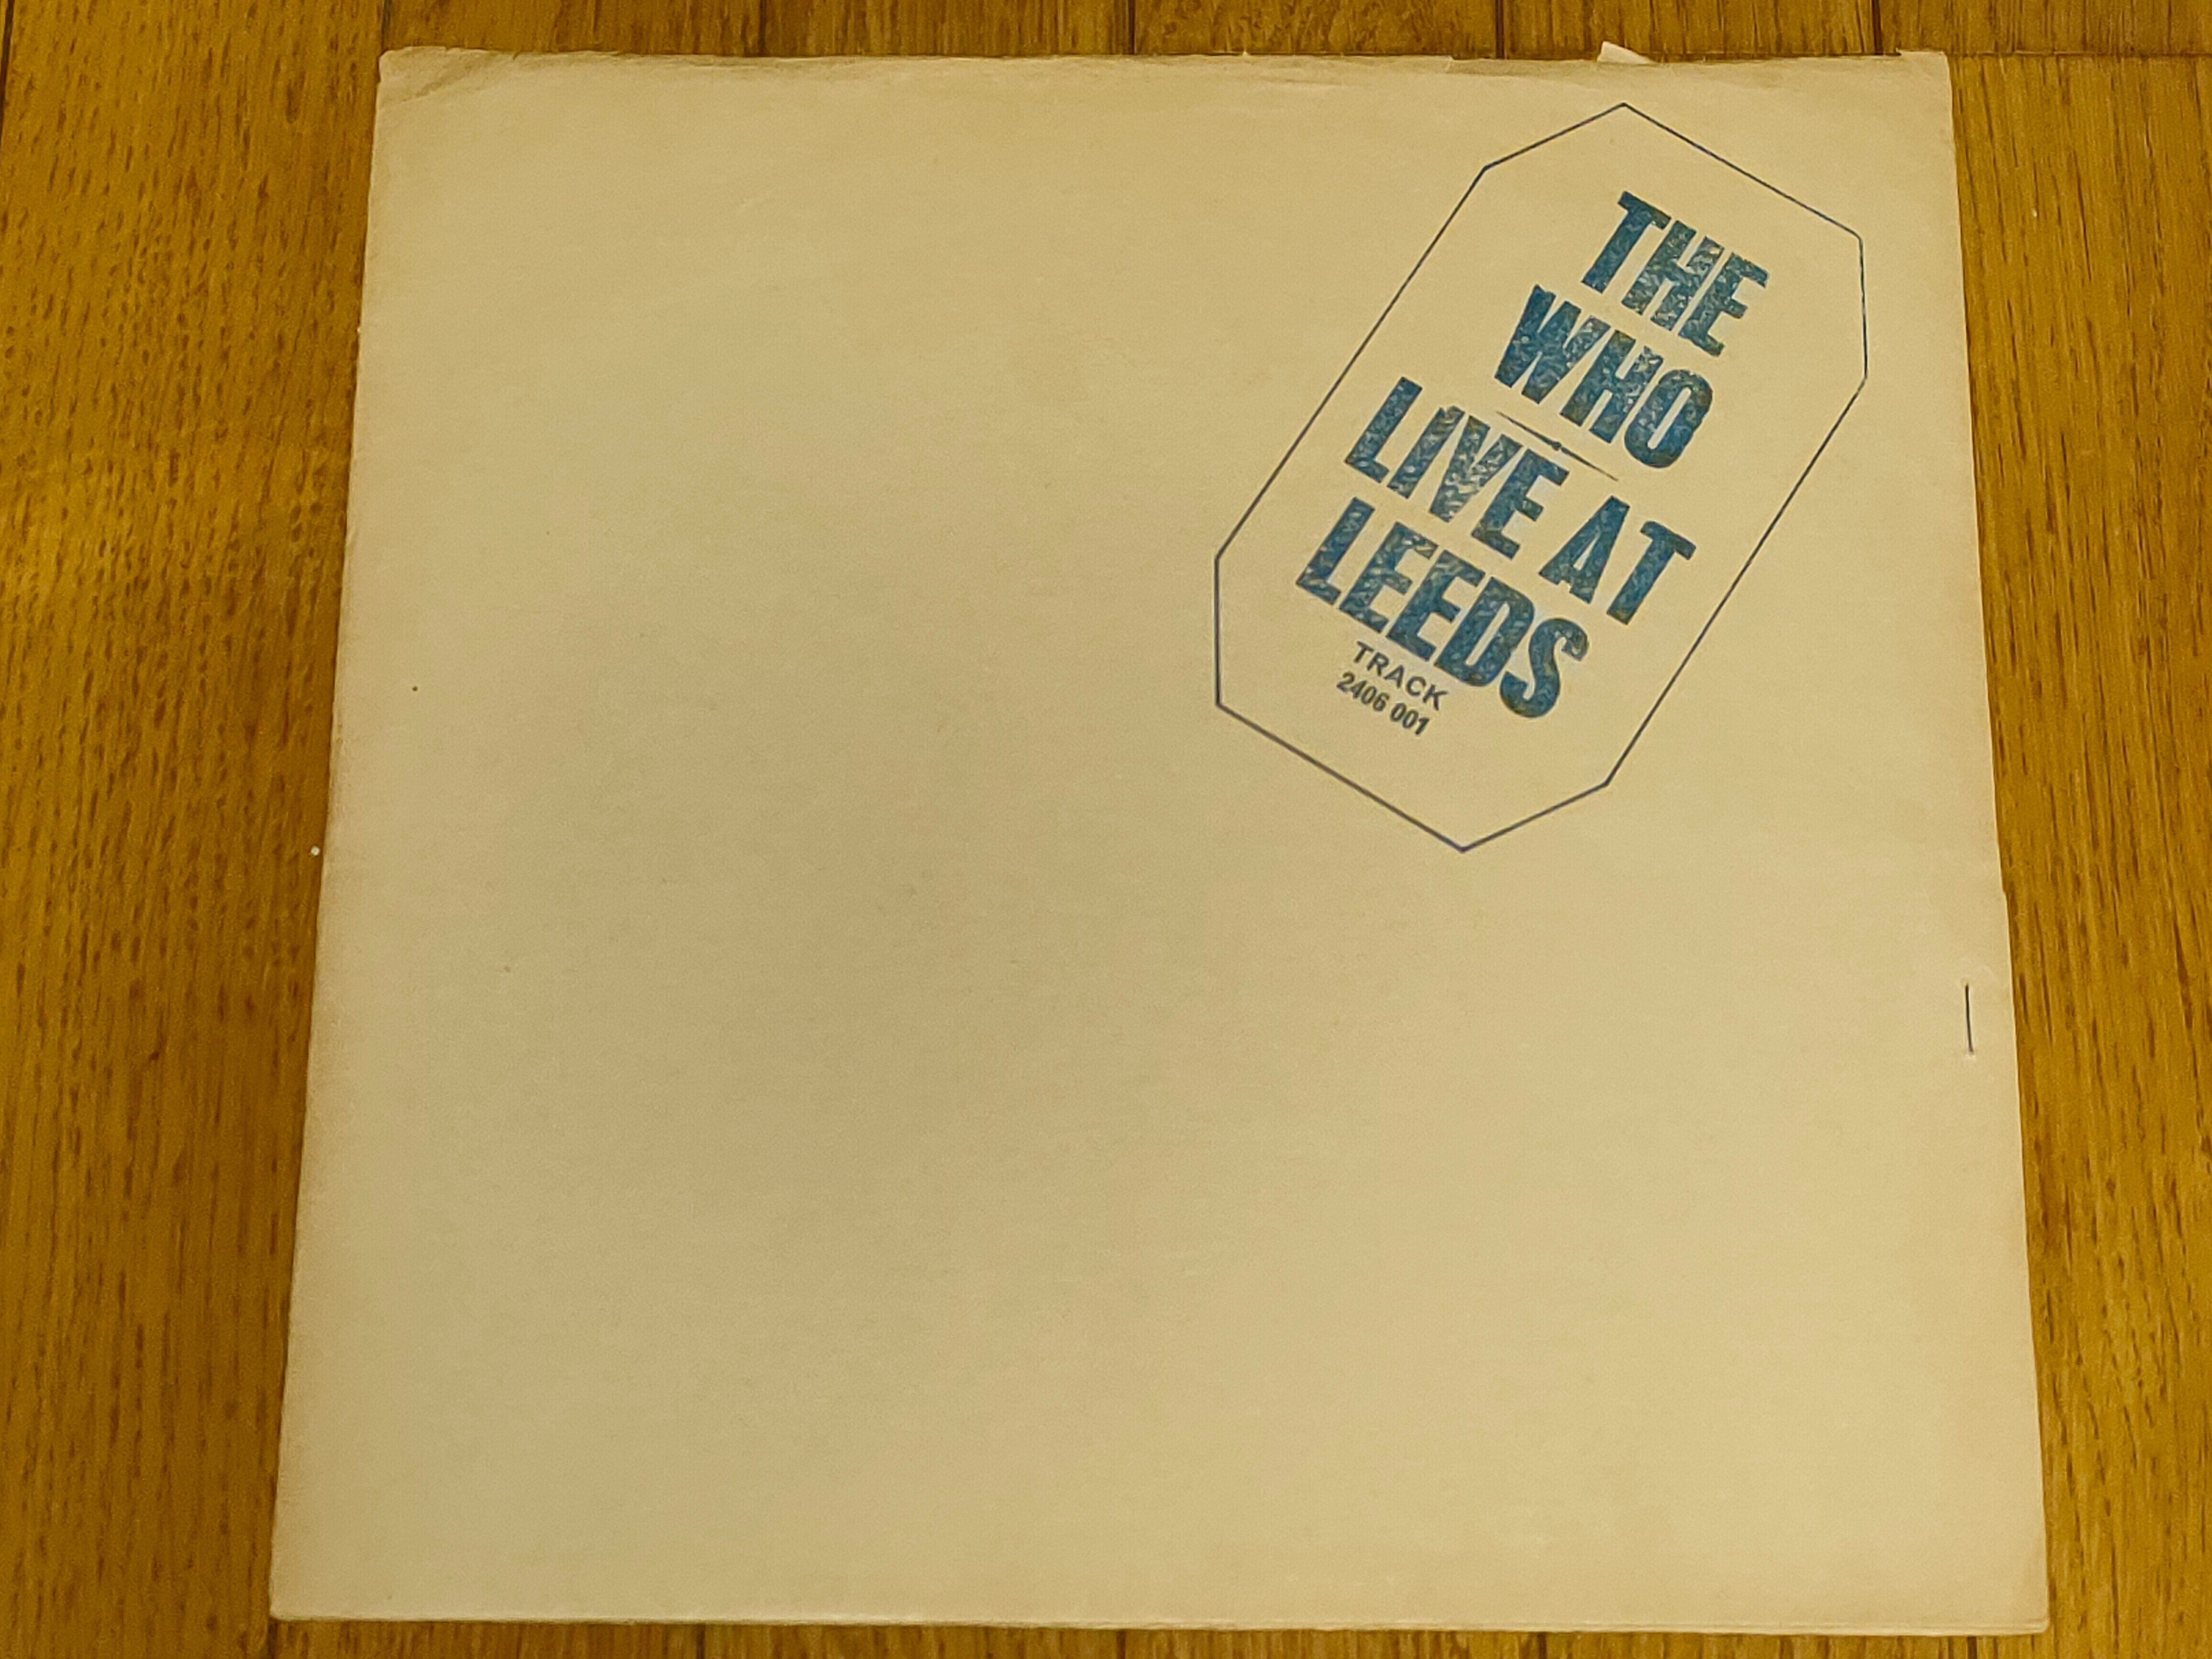 Live at Leeds】(1970) The Who 熱狂の爆音ライヴ盤｜よっしー